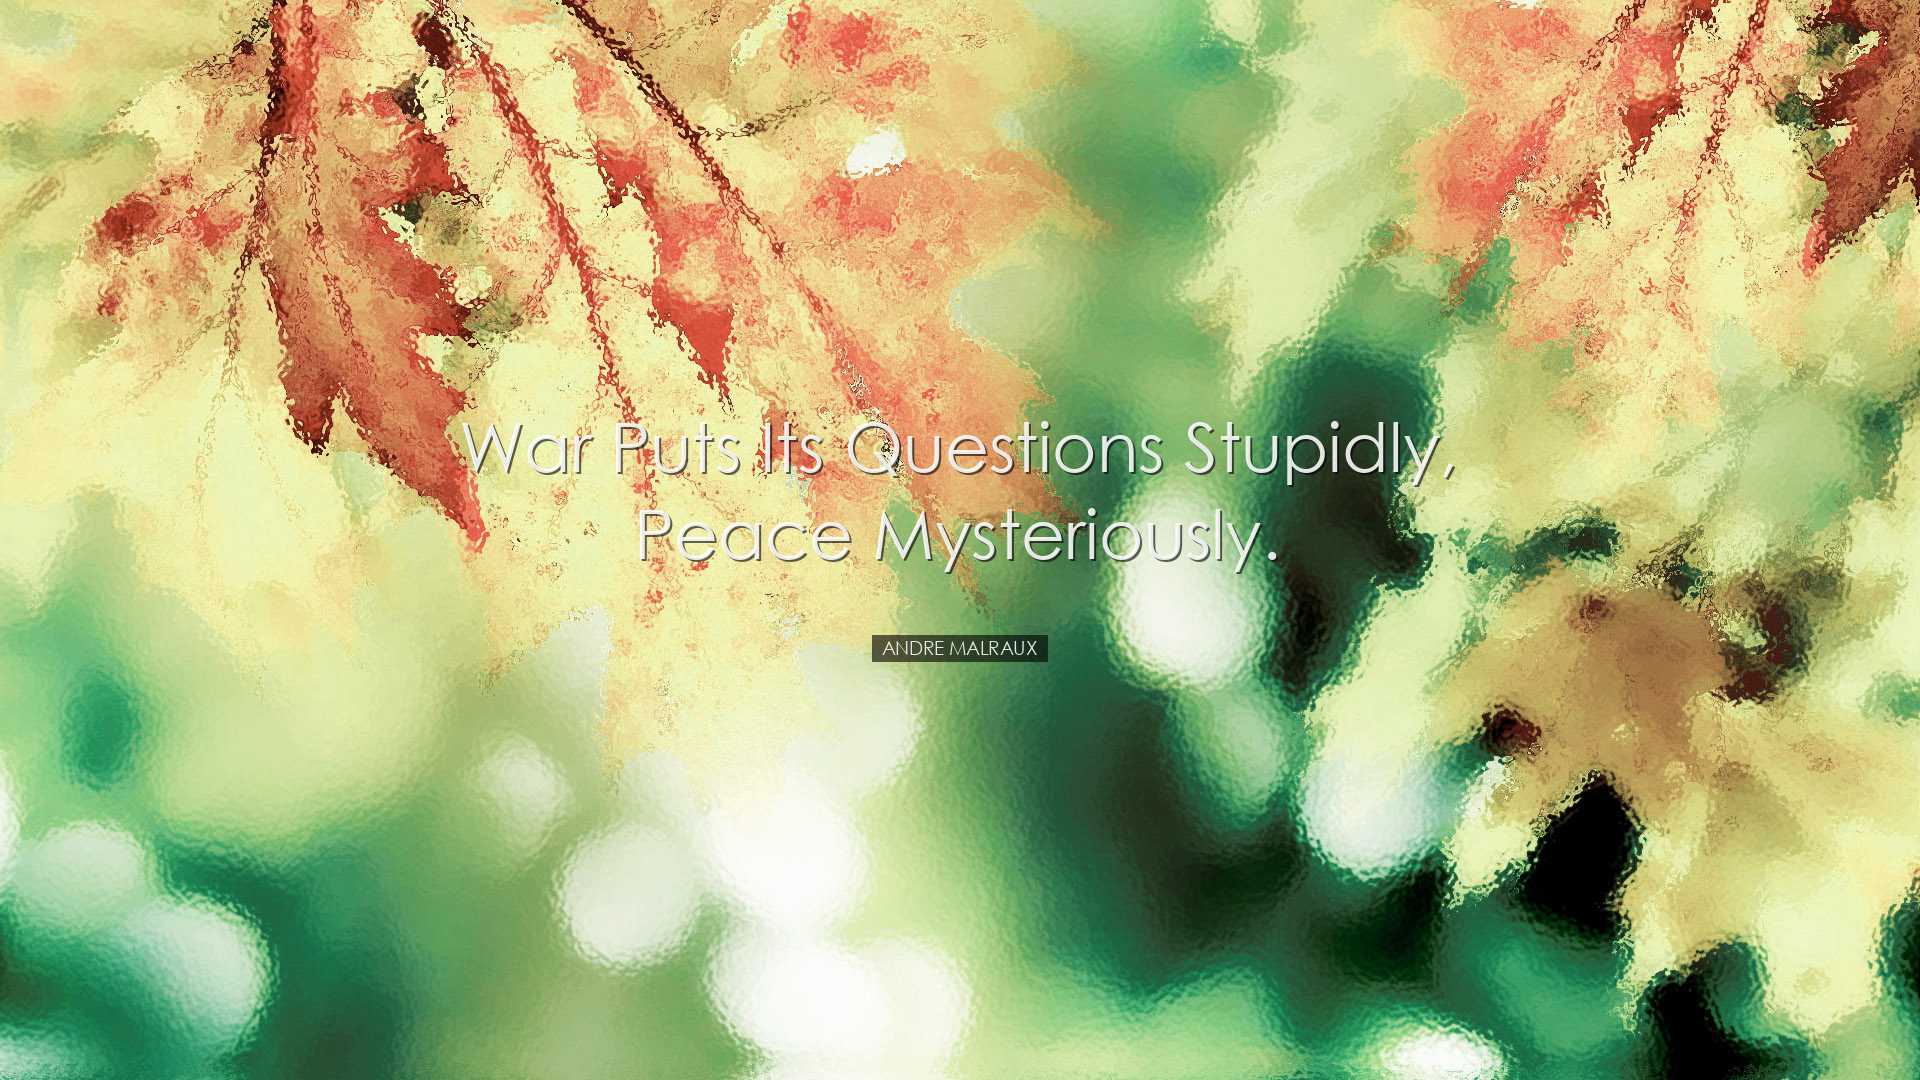 War puts its questions stupidly, peace mysteriously. - Andre Malra